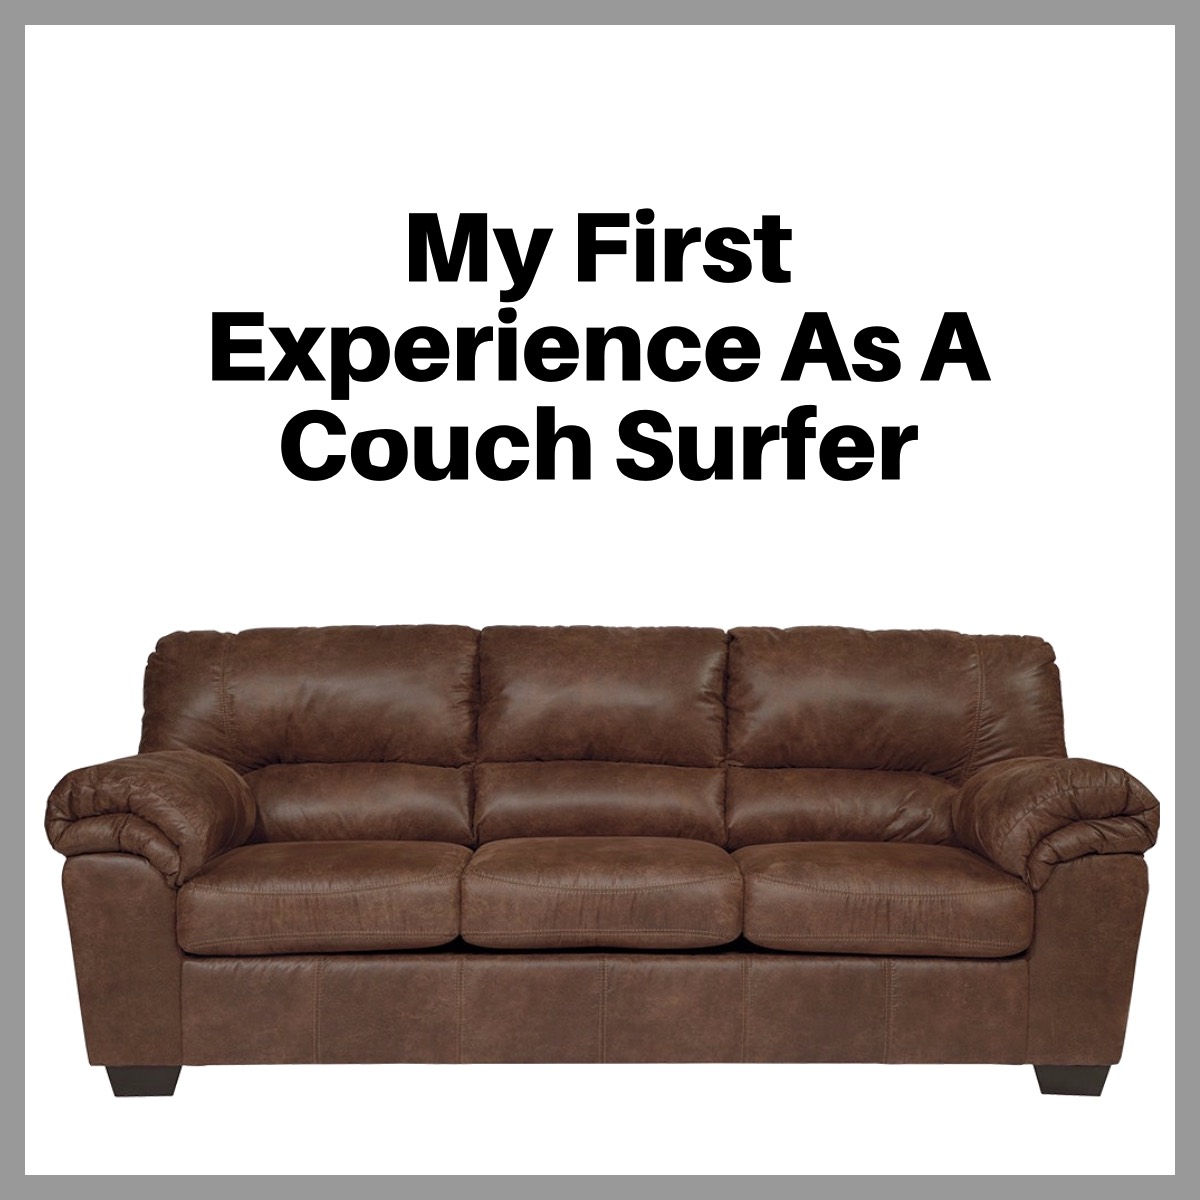 My First Experience As A Couch Surfer